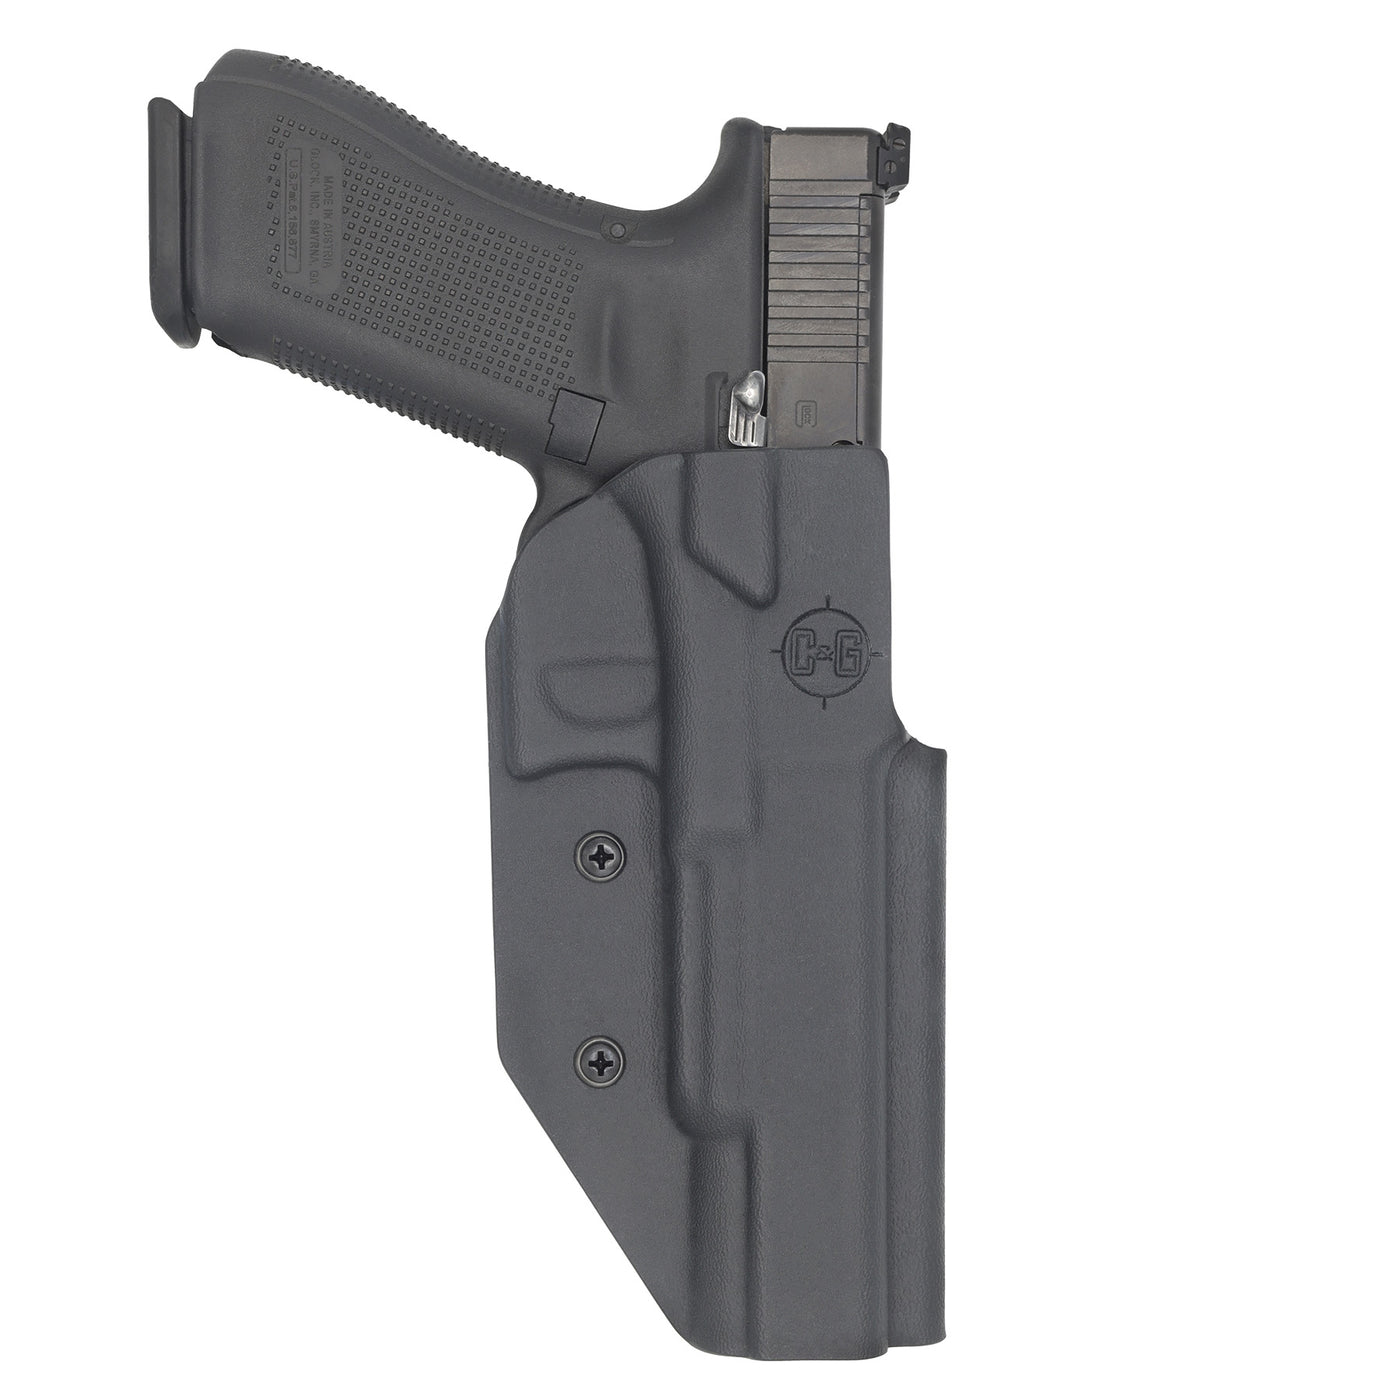 C&G Holsters COMPETITION kydex holster Glock 17L